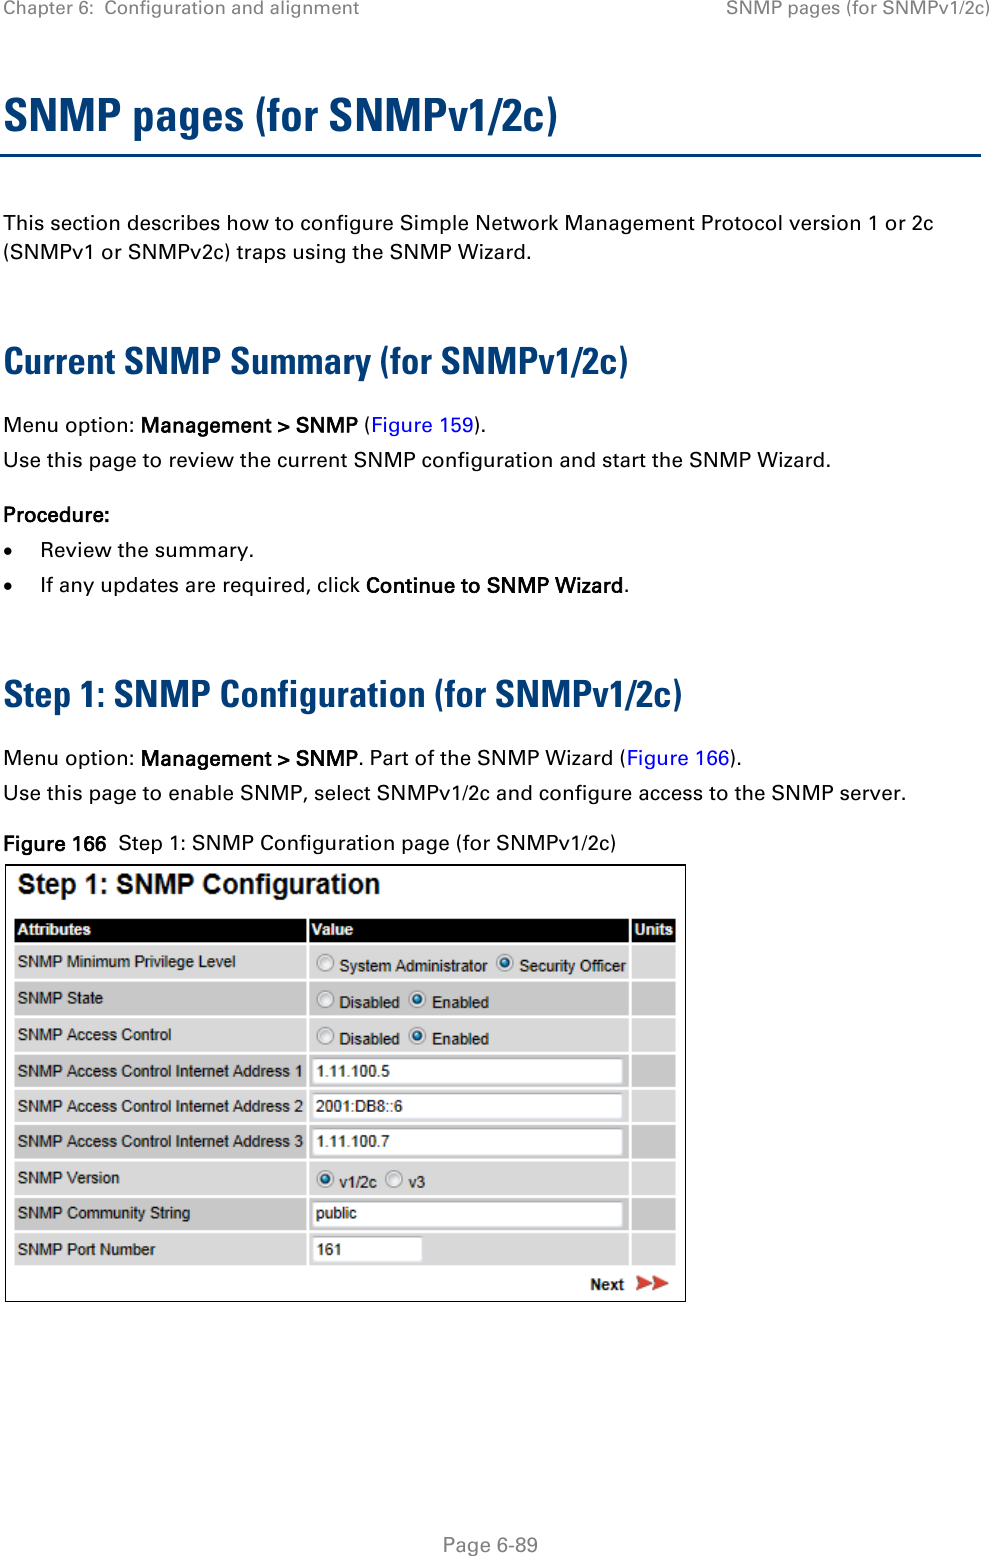 Chapter 6:  Configuration and alignment SNMP pages (for SNMPv1/2c)  SNMP pages (for SNMPv1/2c) This section describes how to configure Simple Network Management Protocol version 1 or 2c (SNMPv1 or SNMPv2c) traps using the SNMP Wizard.  Current SNMP Summary (for SNMPv1/2c) Menu option: Management &gt; SNMP (Figure 159). Use this page to review the current SNMP configuration and start the SNMP Wizard. Procedure: • Review the summary. • If any updates are required, click Continue to SNMP Wizard.  Step 1: SNMP Configuration (for SNMPv1/2c) Menu option: Management &gt; SNMP. Part of the SNMP Wizard (Figure 166). Use this page to enable SNMP, select SNMPv1/2c and configure access to the SNMP server. Figure 166  Step 1: SNMP Configuration page (for SNMPv1/2c)     Page 6-89 